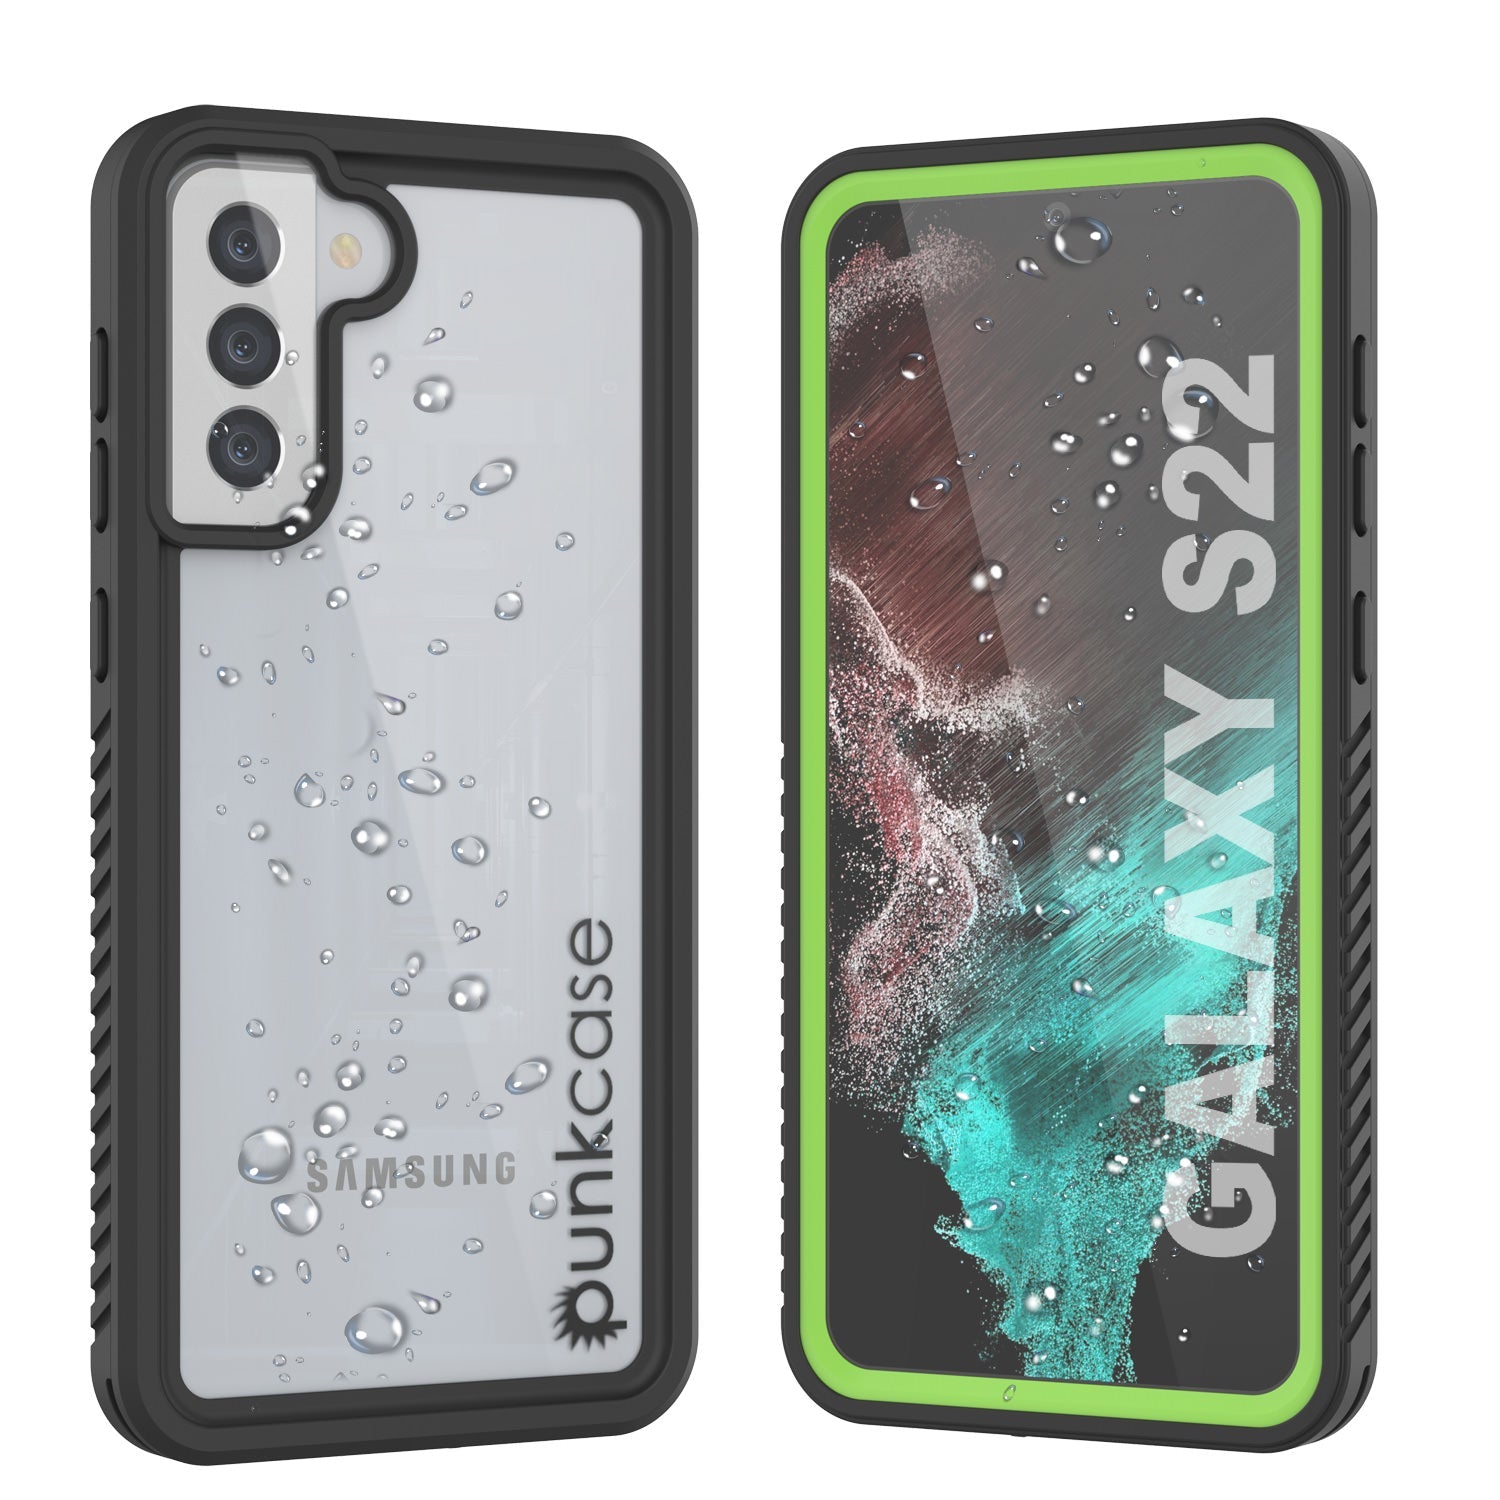 Galaxy S22 Water/ Shockproof [Extreme Series] Screen Protector Case [Light Green]